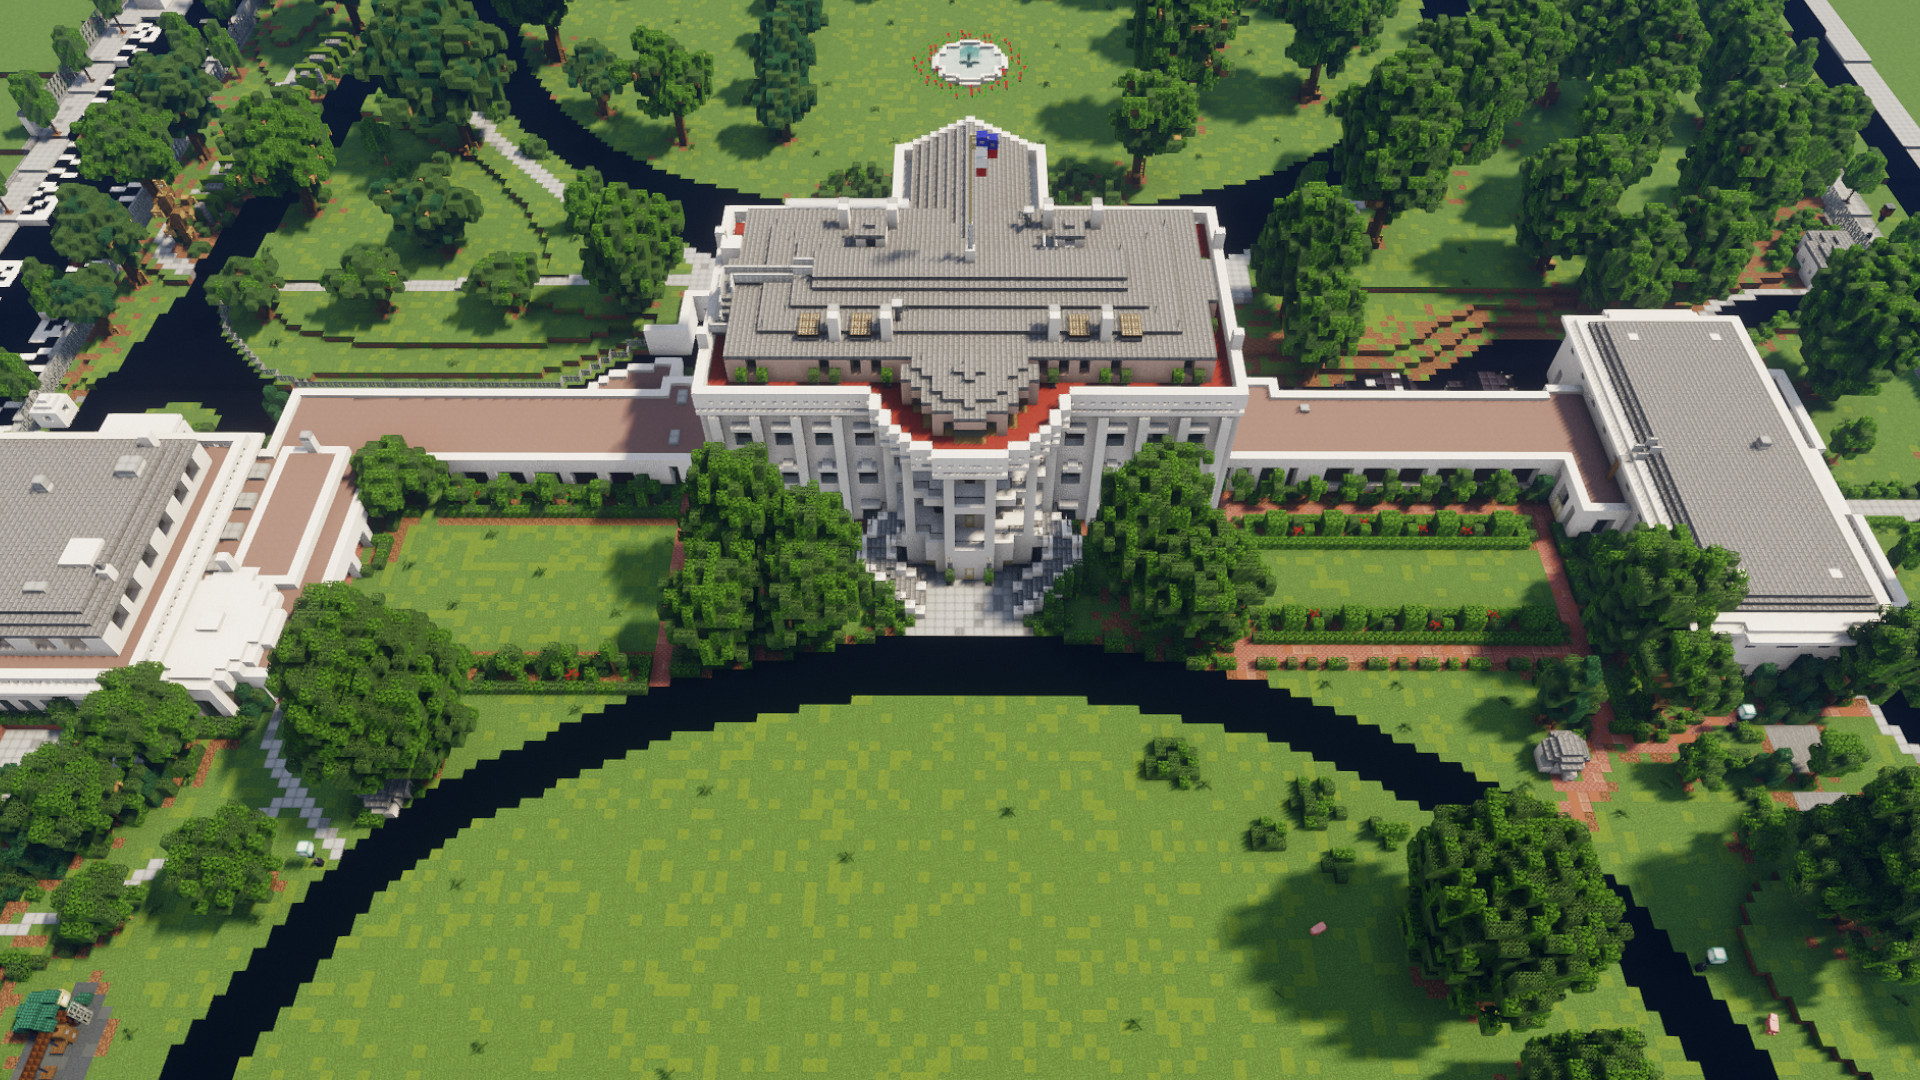 You can explore the White House in Minecraft at 1:1 scale